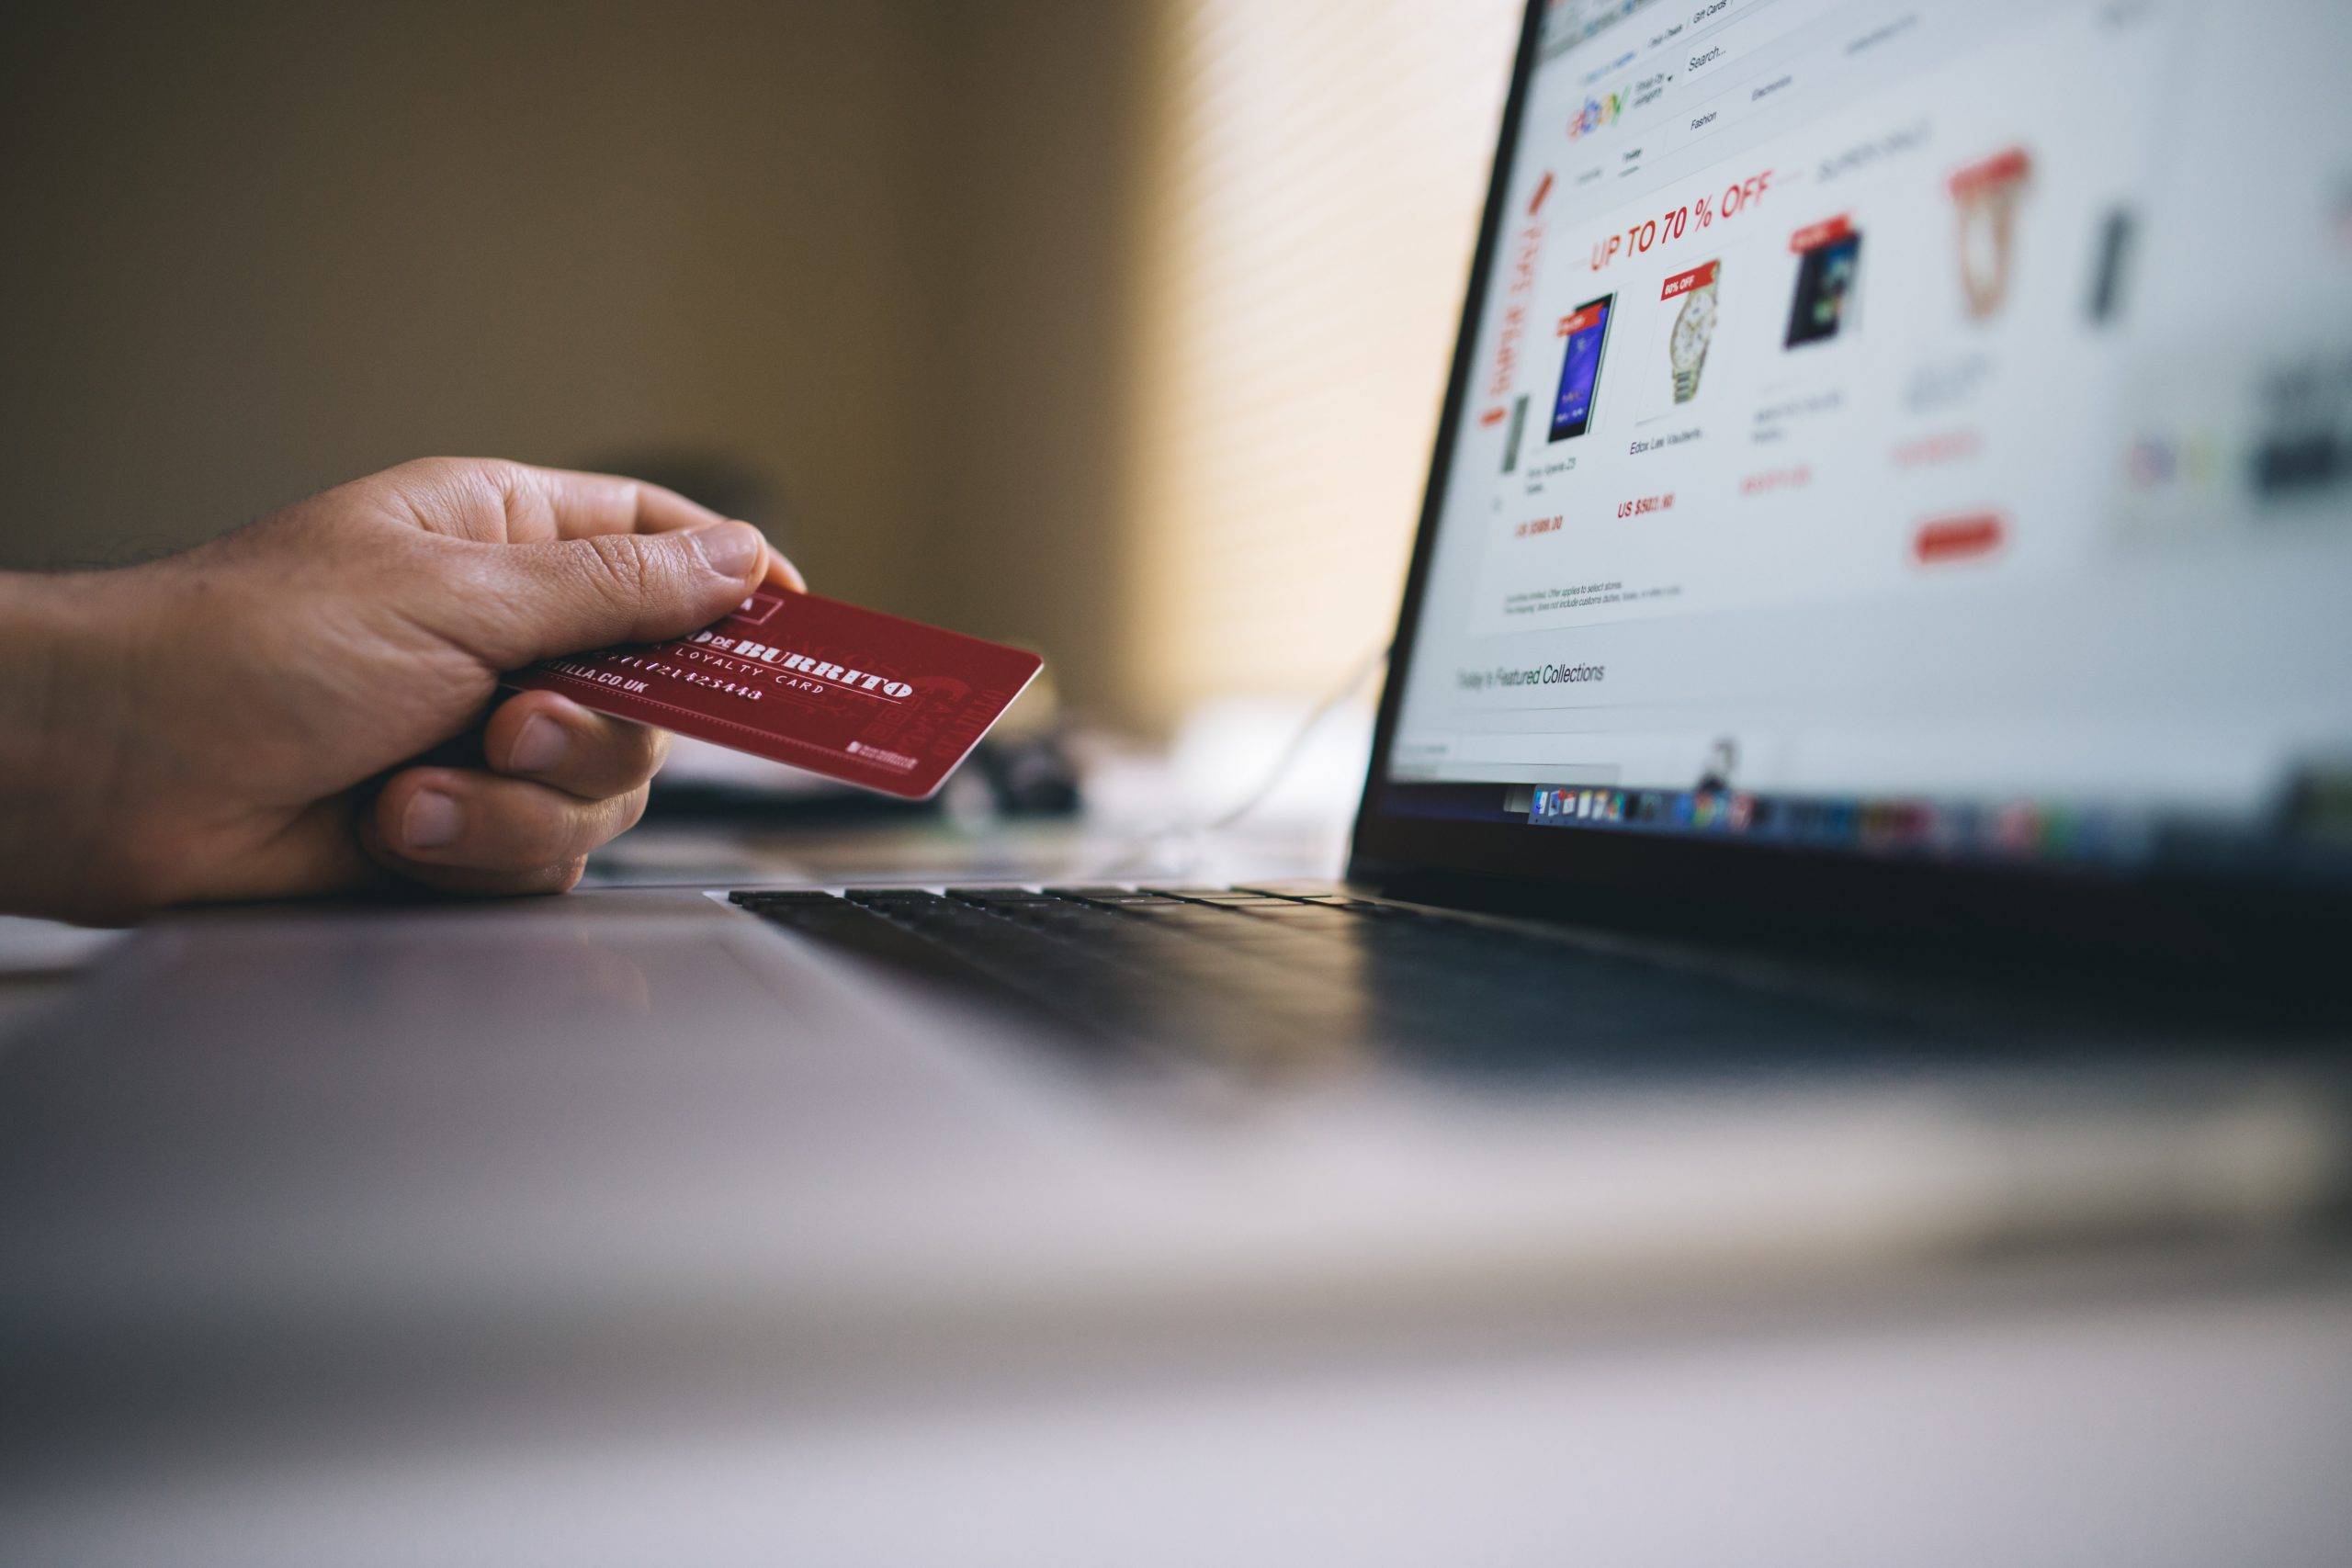 WHAT IS AN ONLINE STORE AND WHY IS IT IMPORTANT?